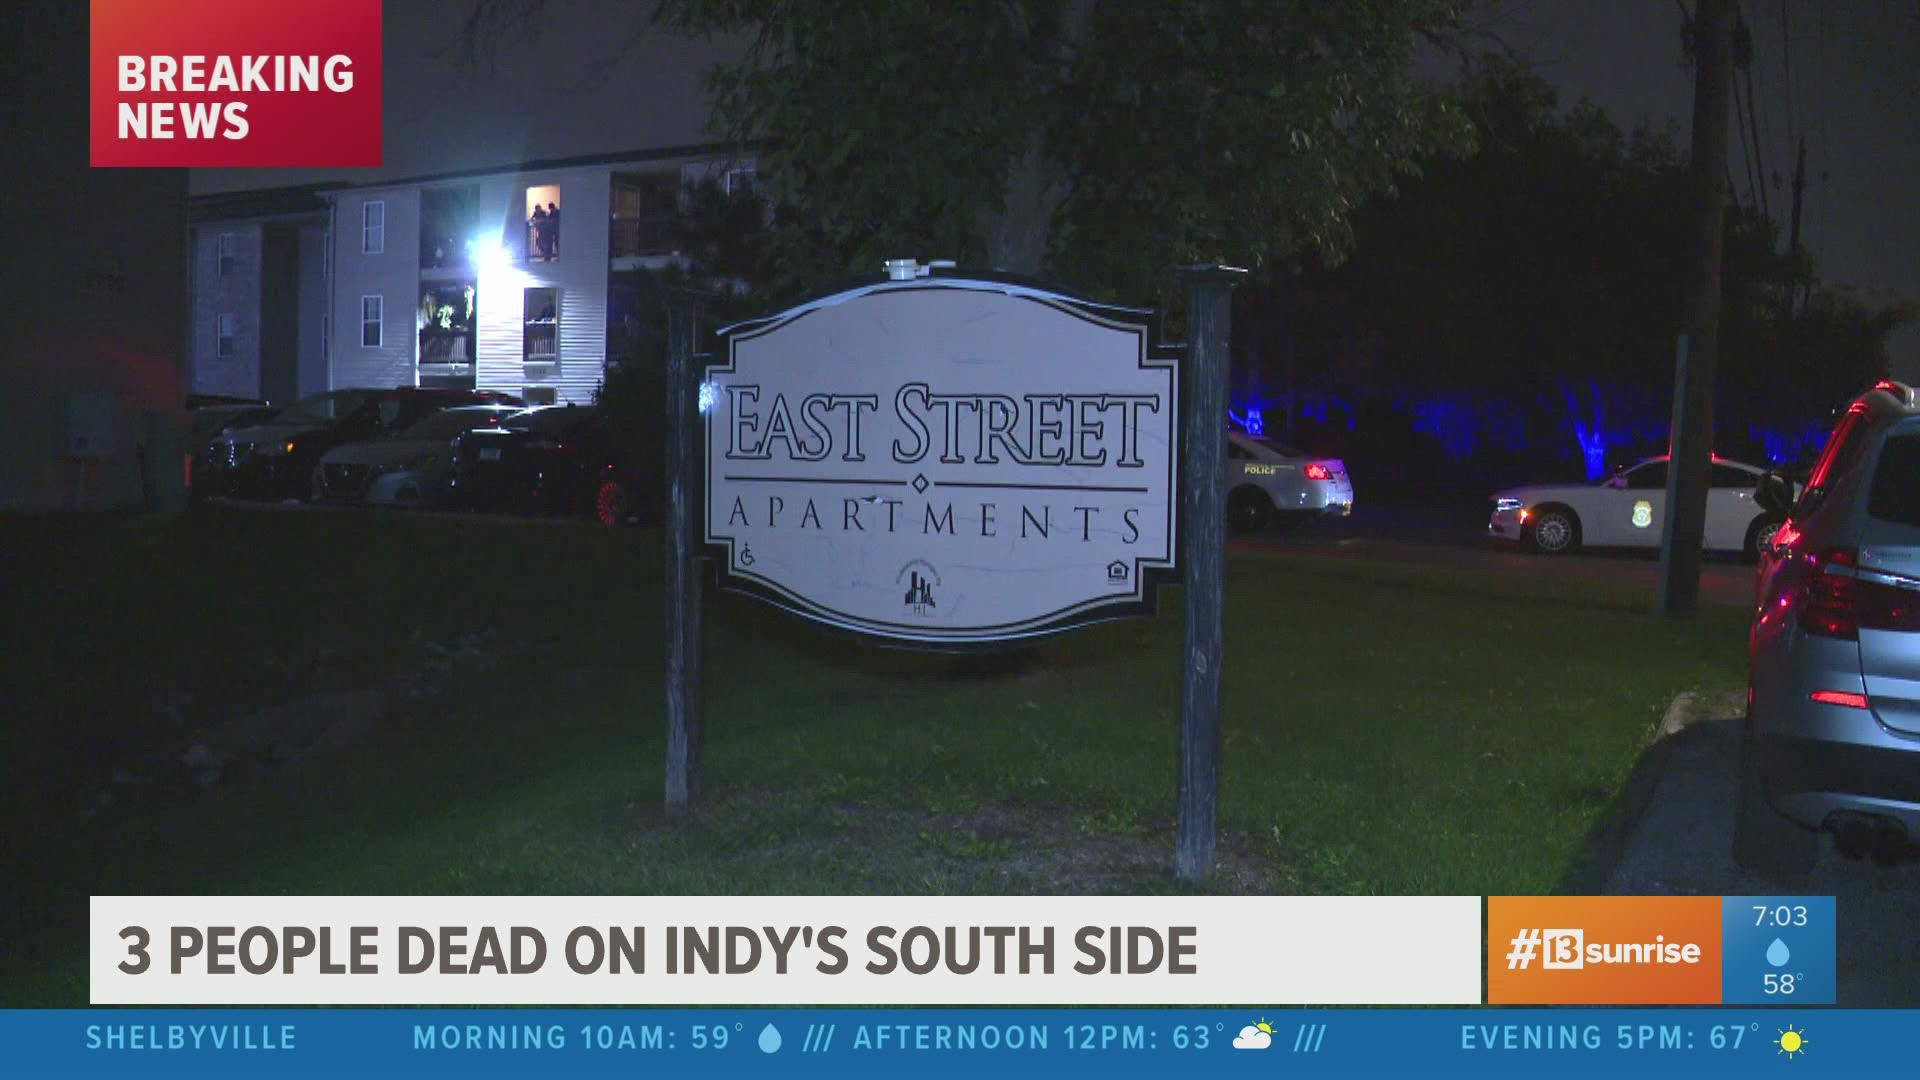 Police report two men and a woman were found dead in an apartment on South East Street early Saturday.